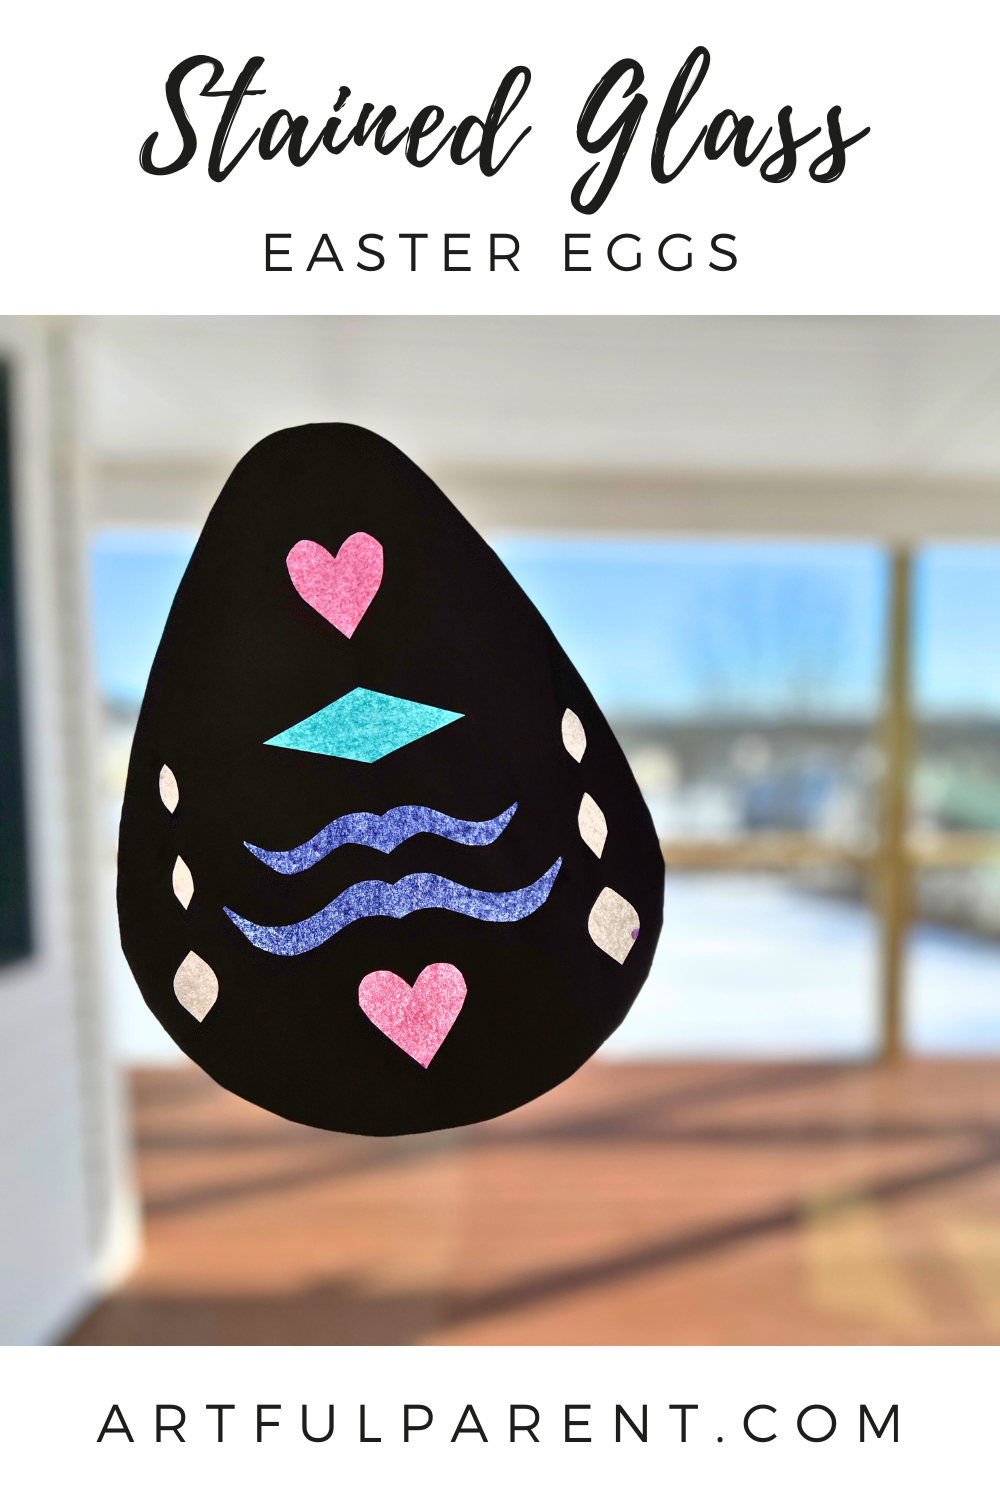 How to Make Stained Glass Easter Eggs